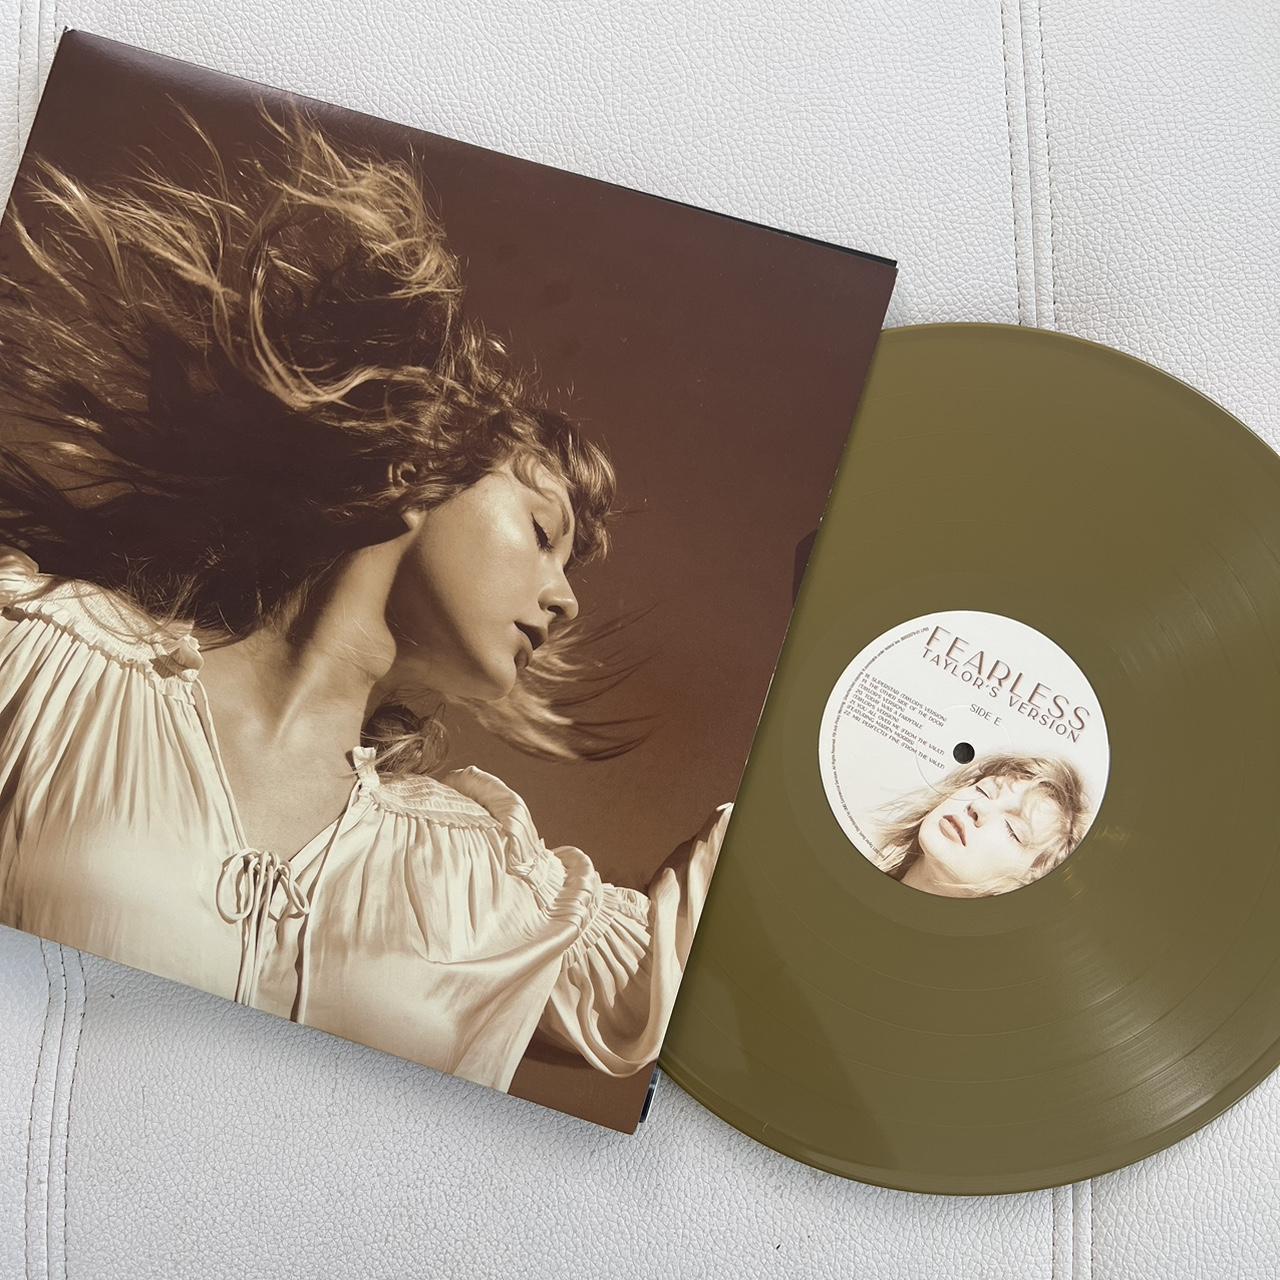 fearless (taylor's version) vinyle – Store Taylor Swift